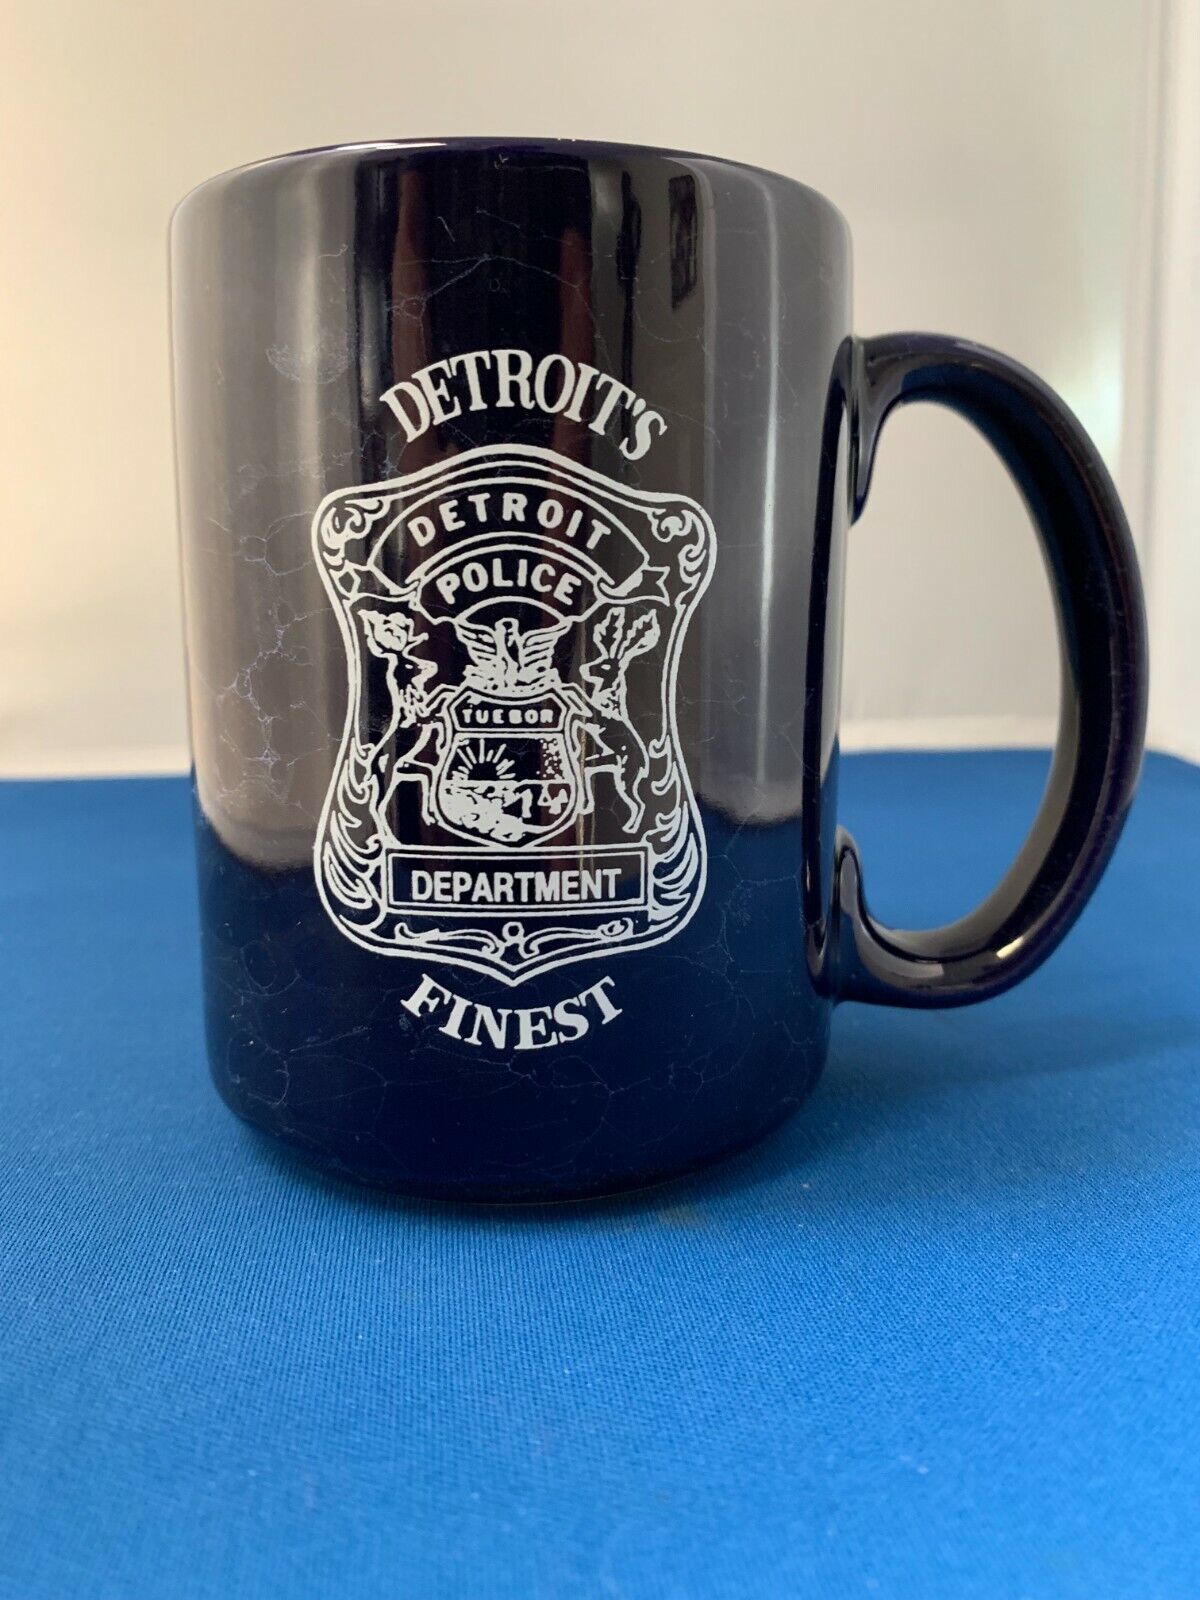 Collectible Coffee Cup Detroit Police Department Finest Coffee Cup Mug